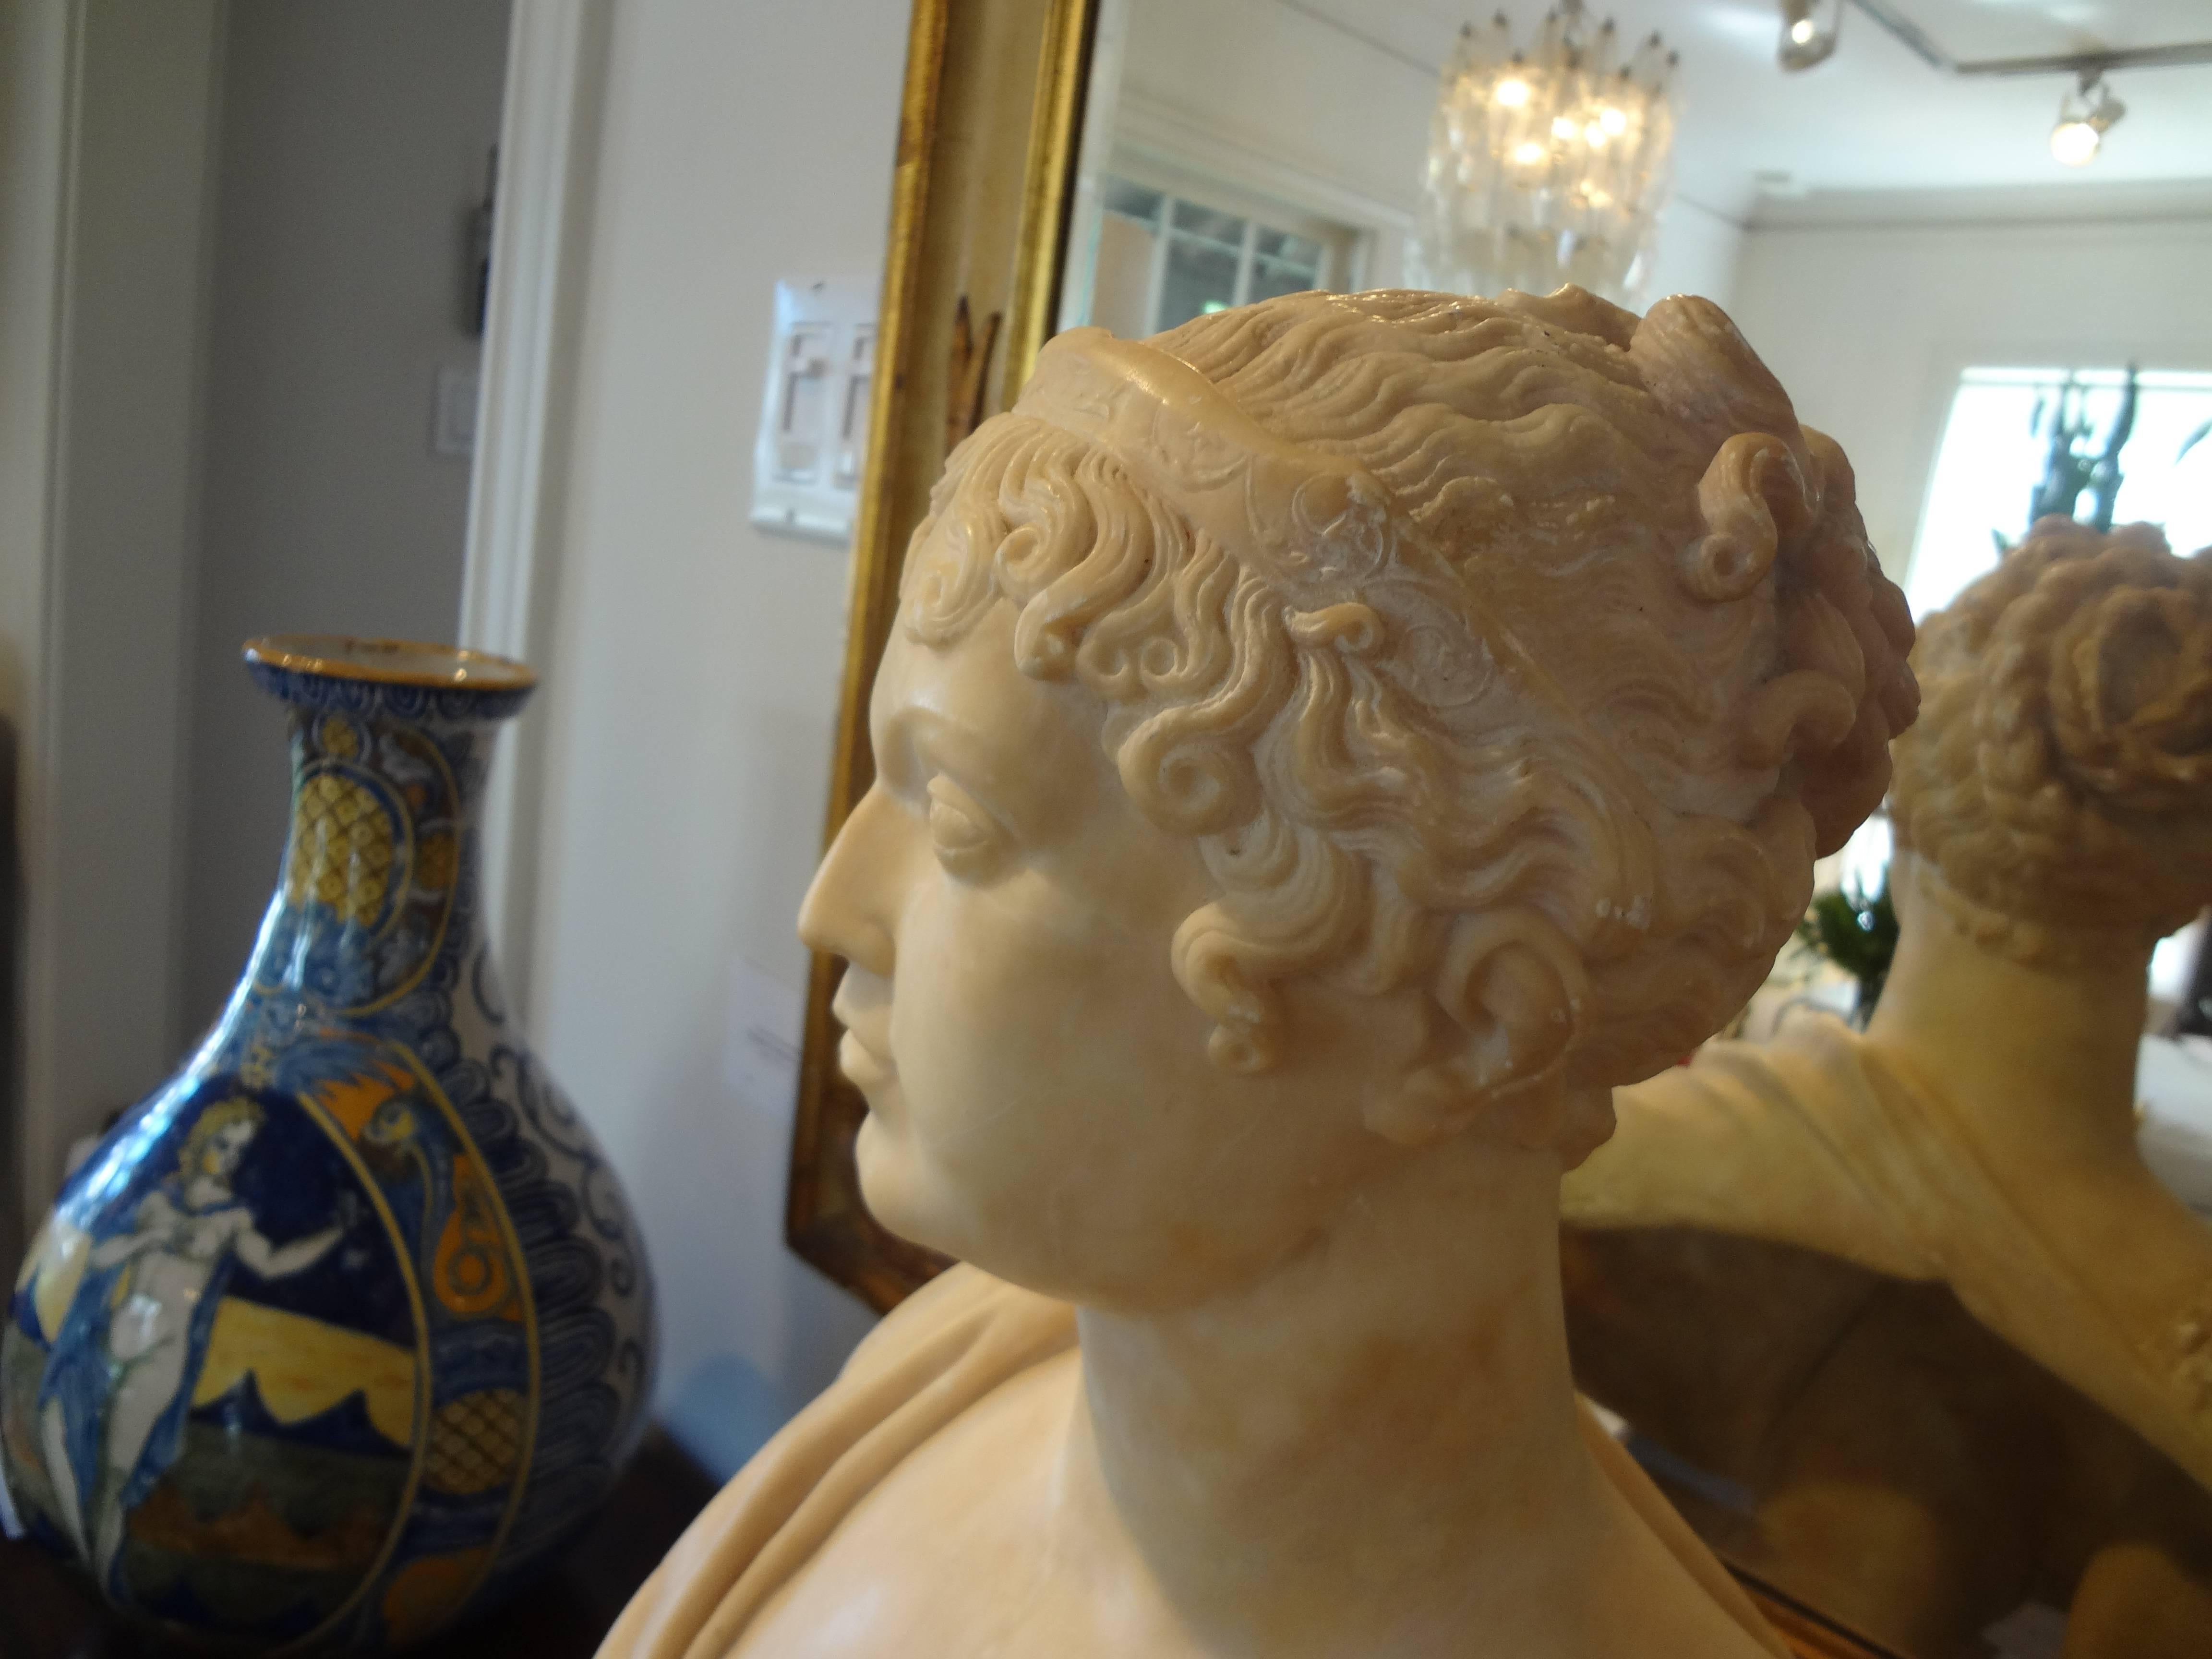 19th century Italian alabaster bust.
Well sculpted antique Italian alabaster or marble bust of a classical female mounted on a plinth. This is a beautifully detailed antique alabaster bust sculpture.
 